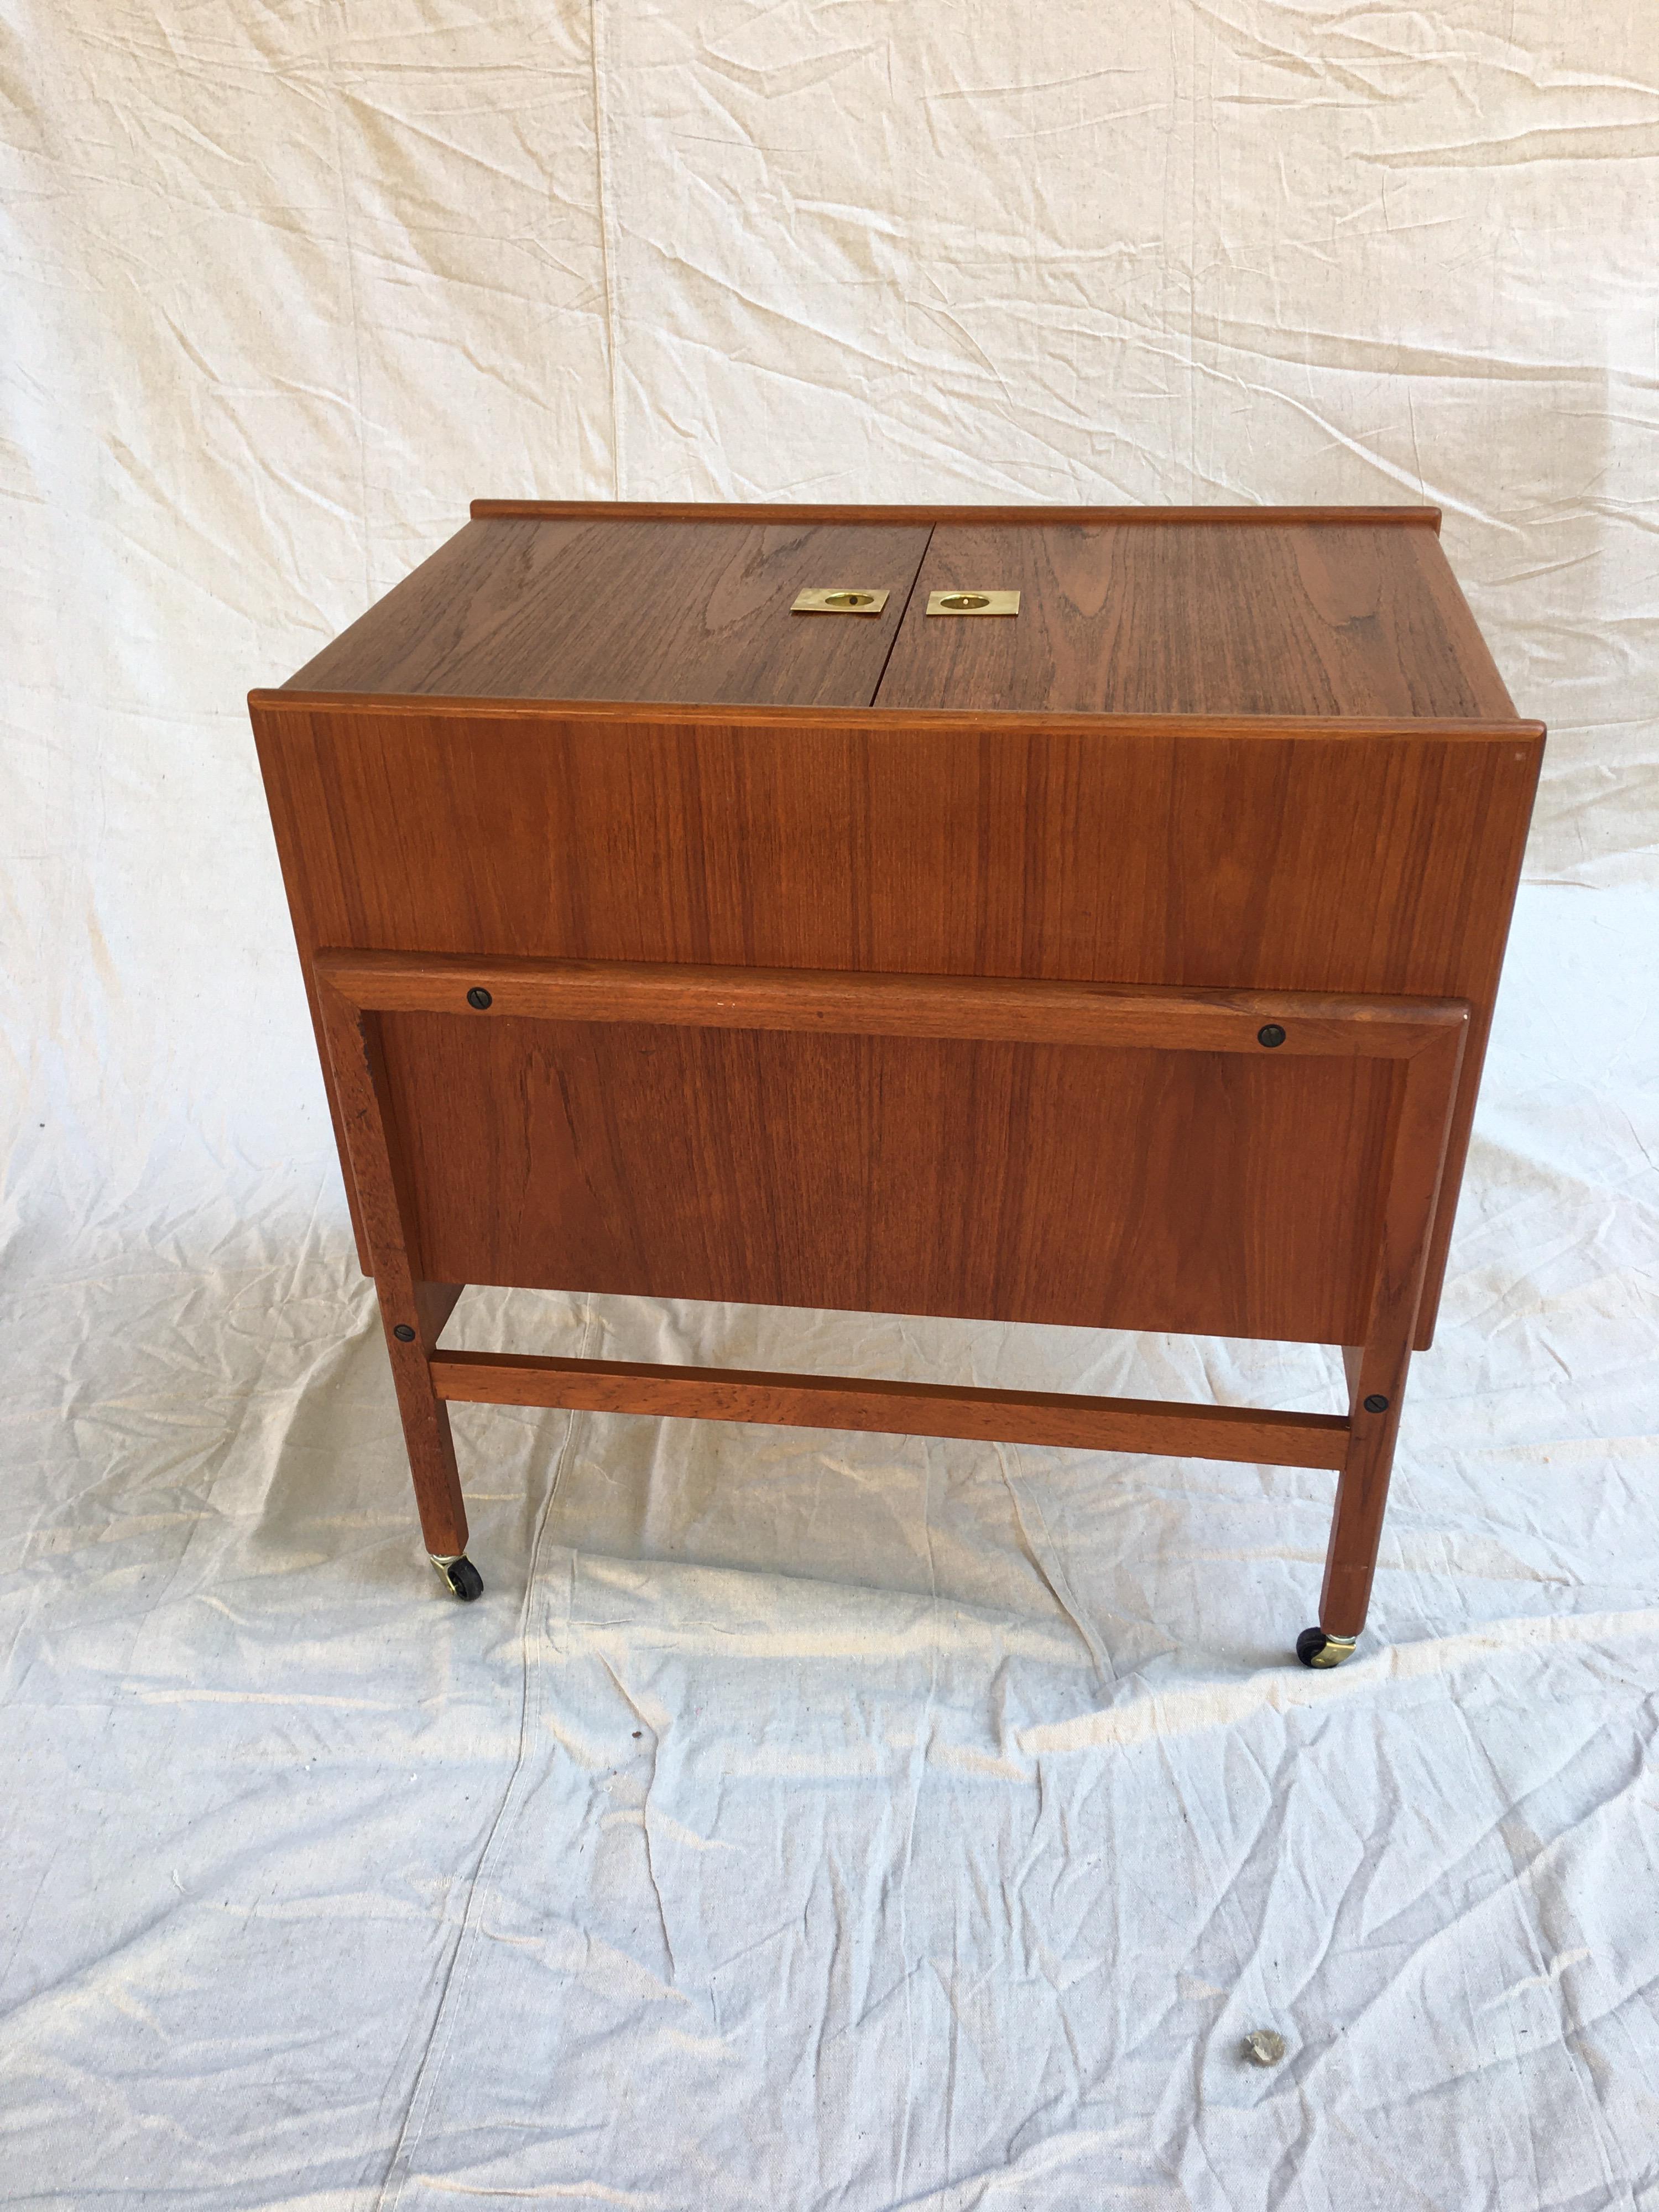 Nice compact rolling bar cabinet, top 2 doors open to reveal bottle storage and lids function as a work surface. Teak with brass accents.